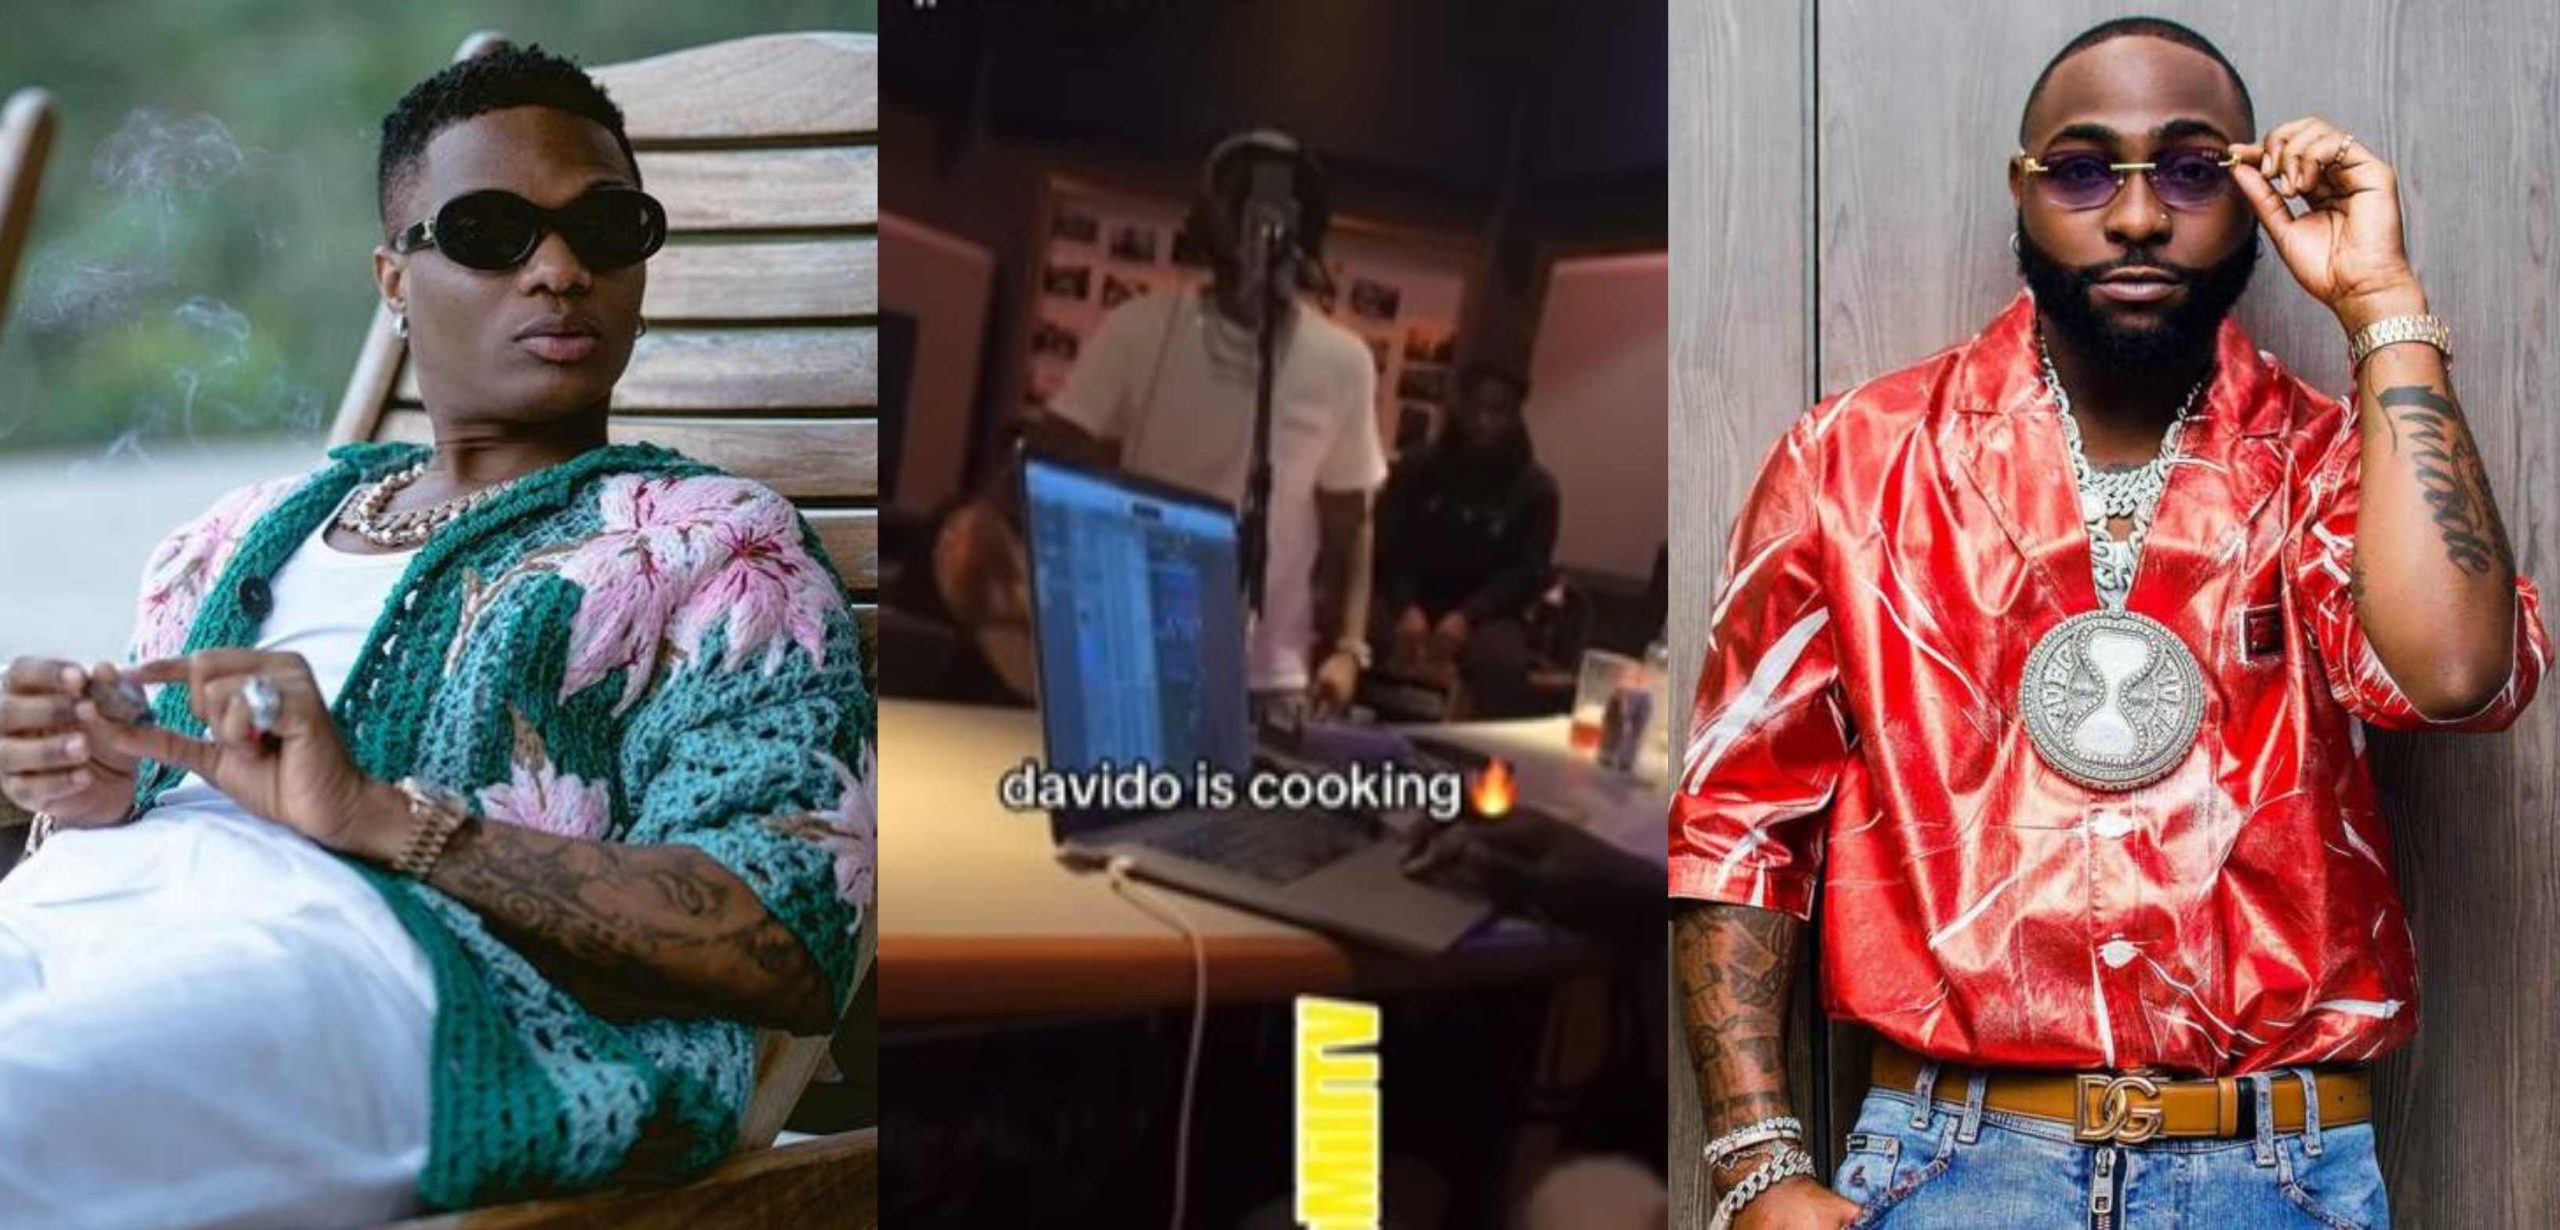 Singer Wizkid reacts after his rival Davido hits the studio cooking a hit song